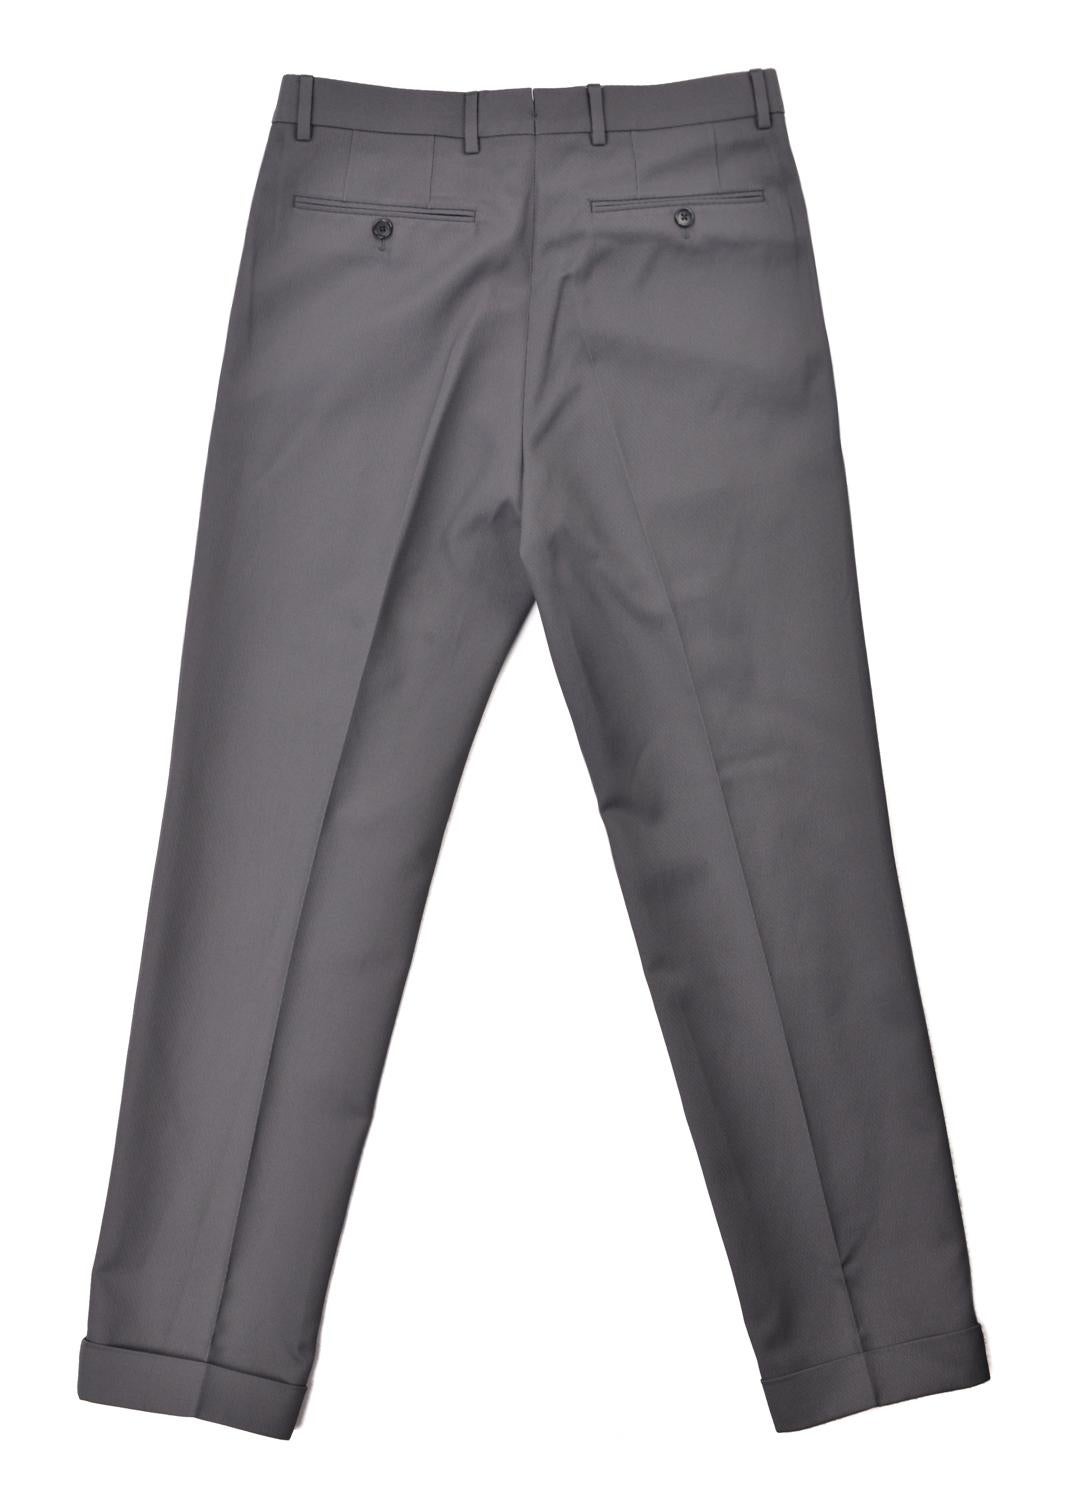 Tom Ford Men Grey Pleat Front Slim Leg Trouser In New Condition For Sale In Brooklyn, NY